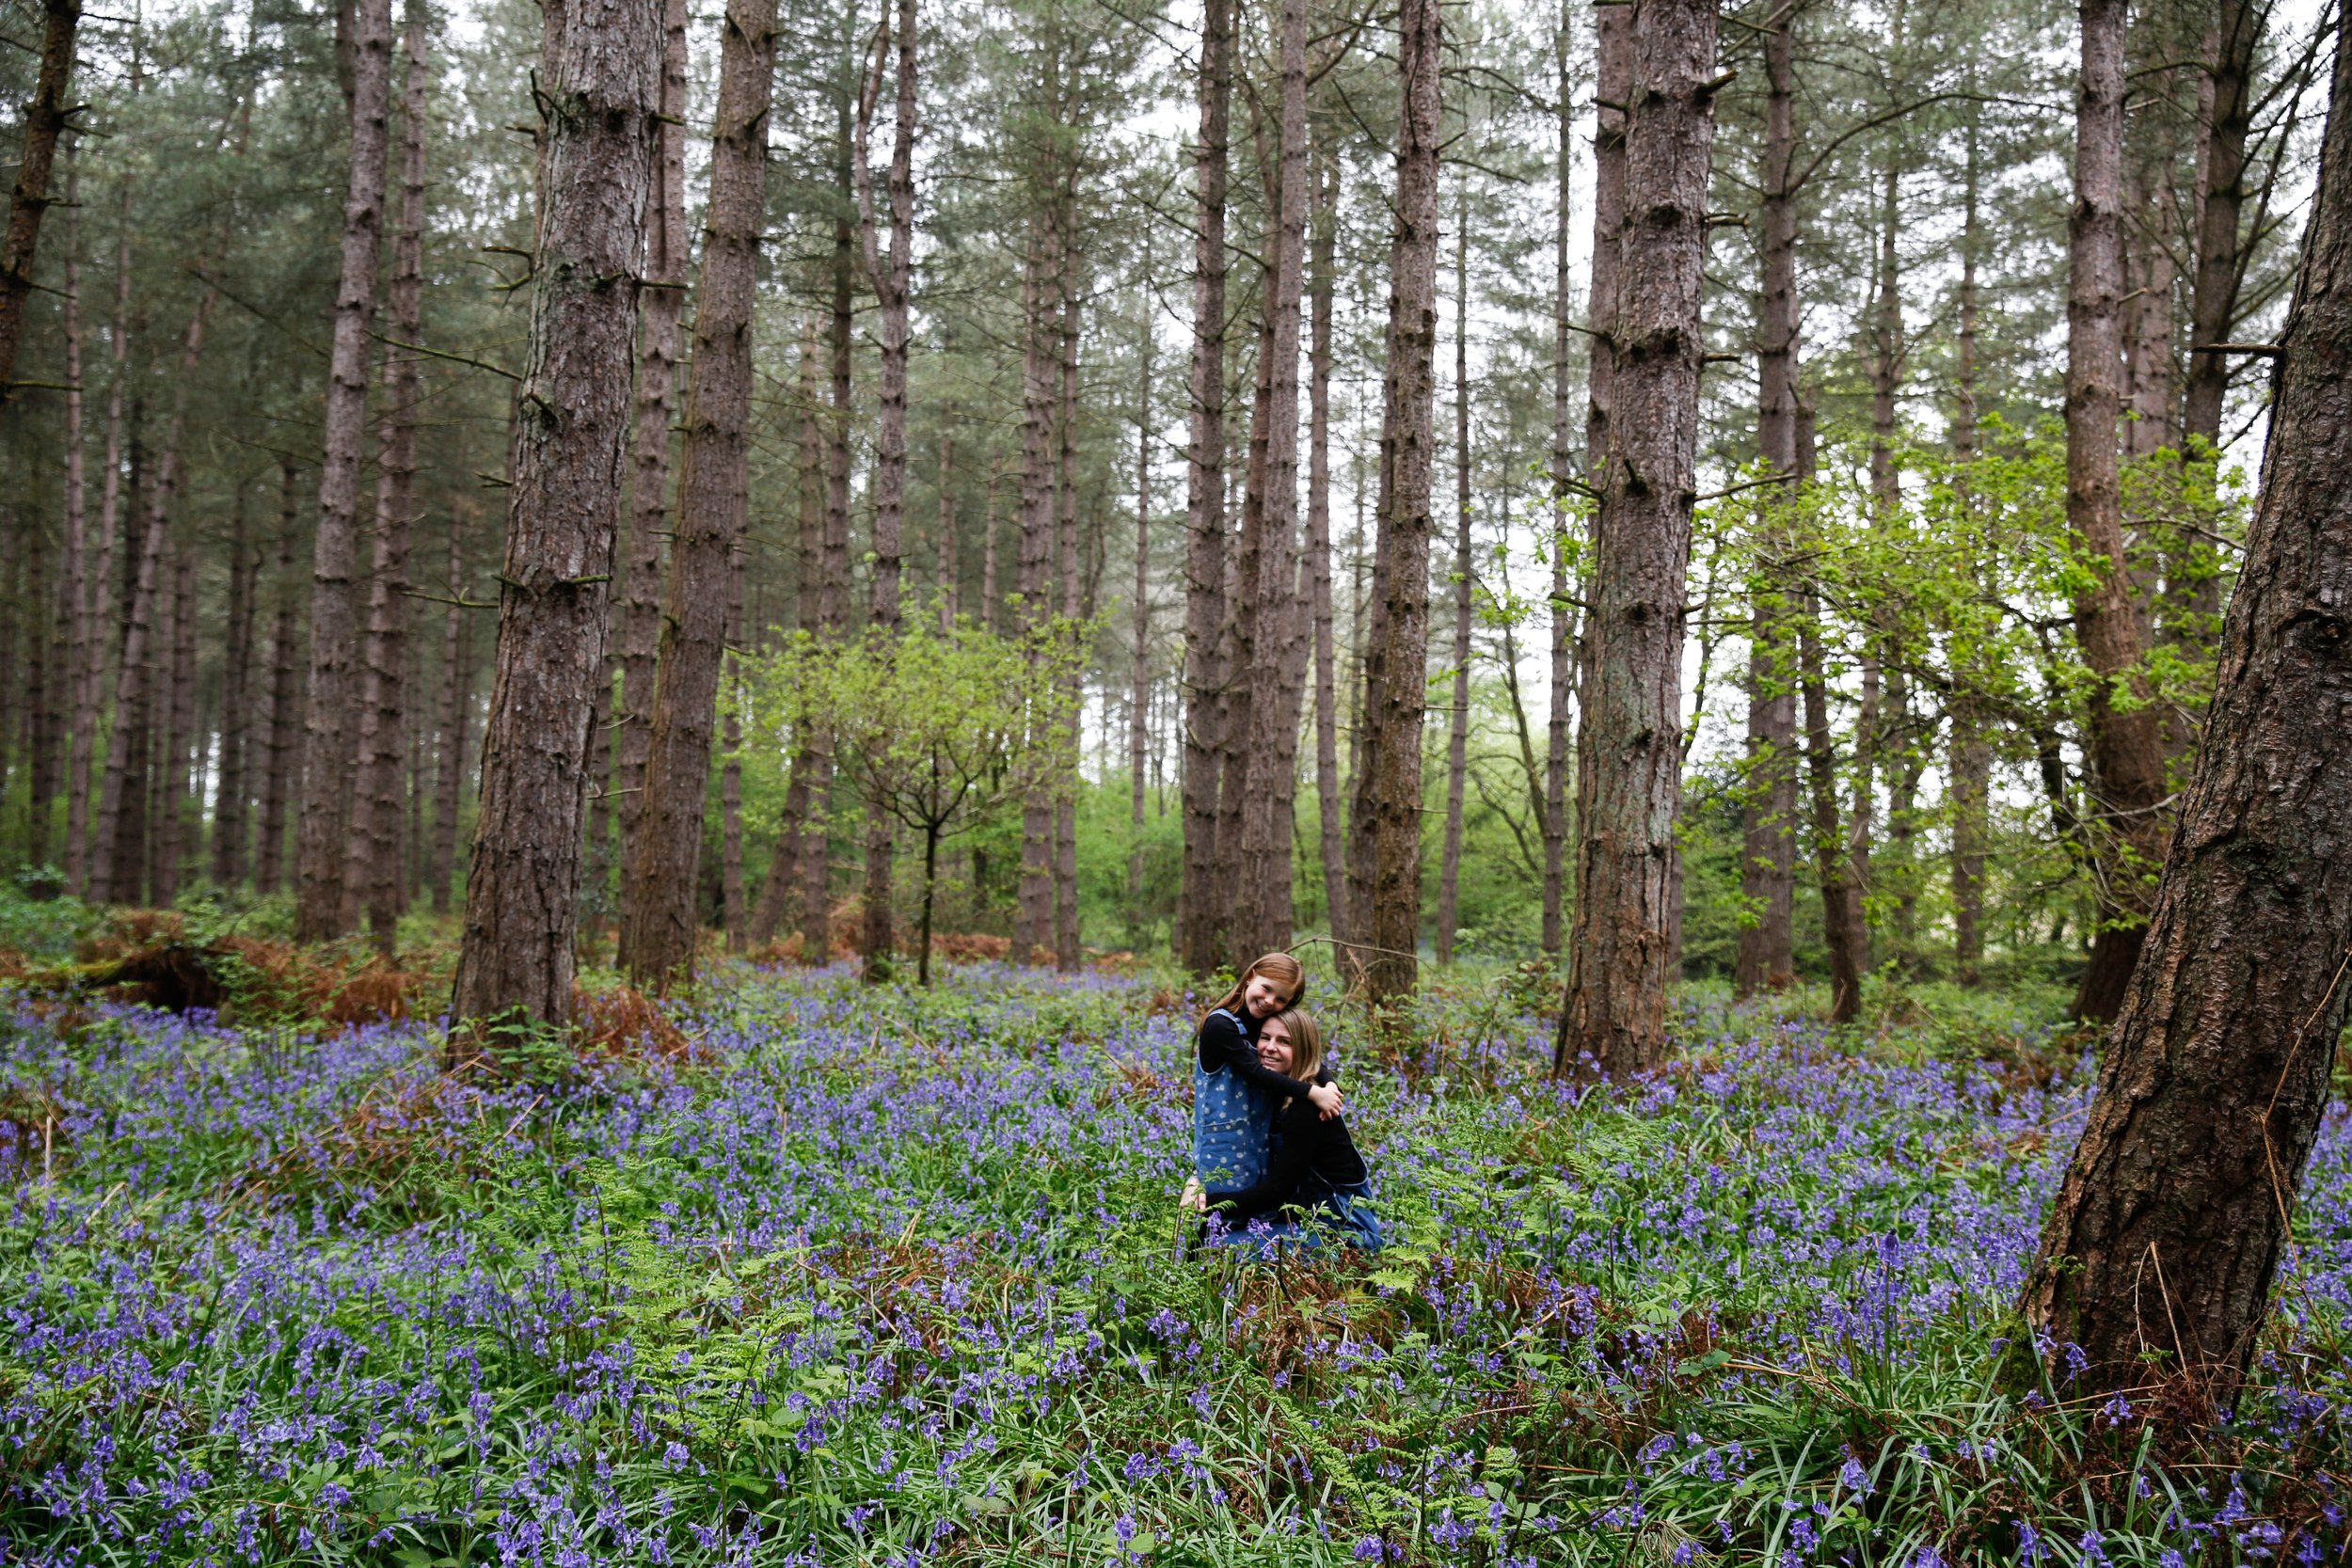 MUM AND DAUGHTER PHOTO SHOOT IN THE BLUEBELLS | BERKSHIRE PORTRAIT SHOOTS01 choice .JPG